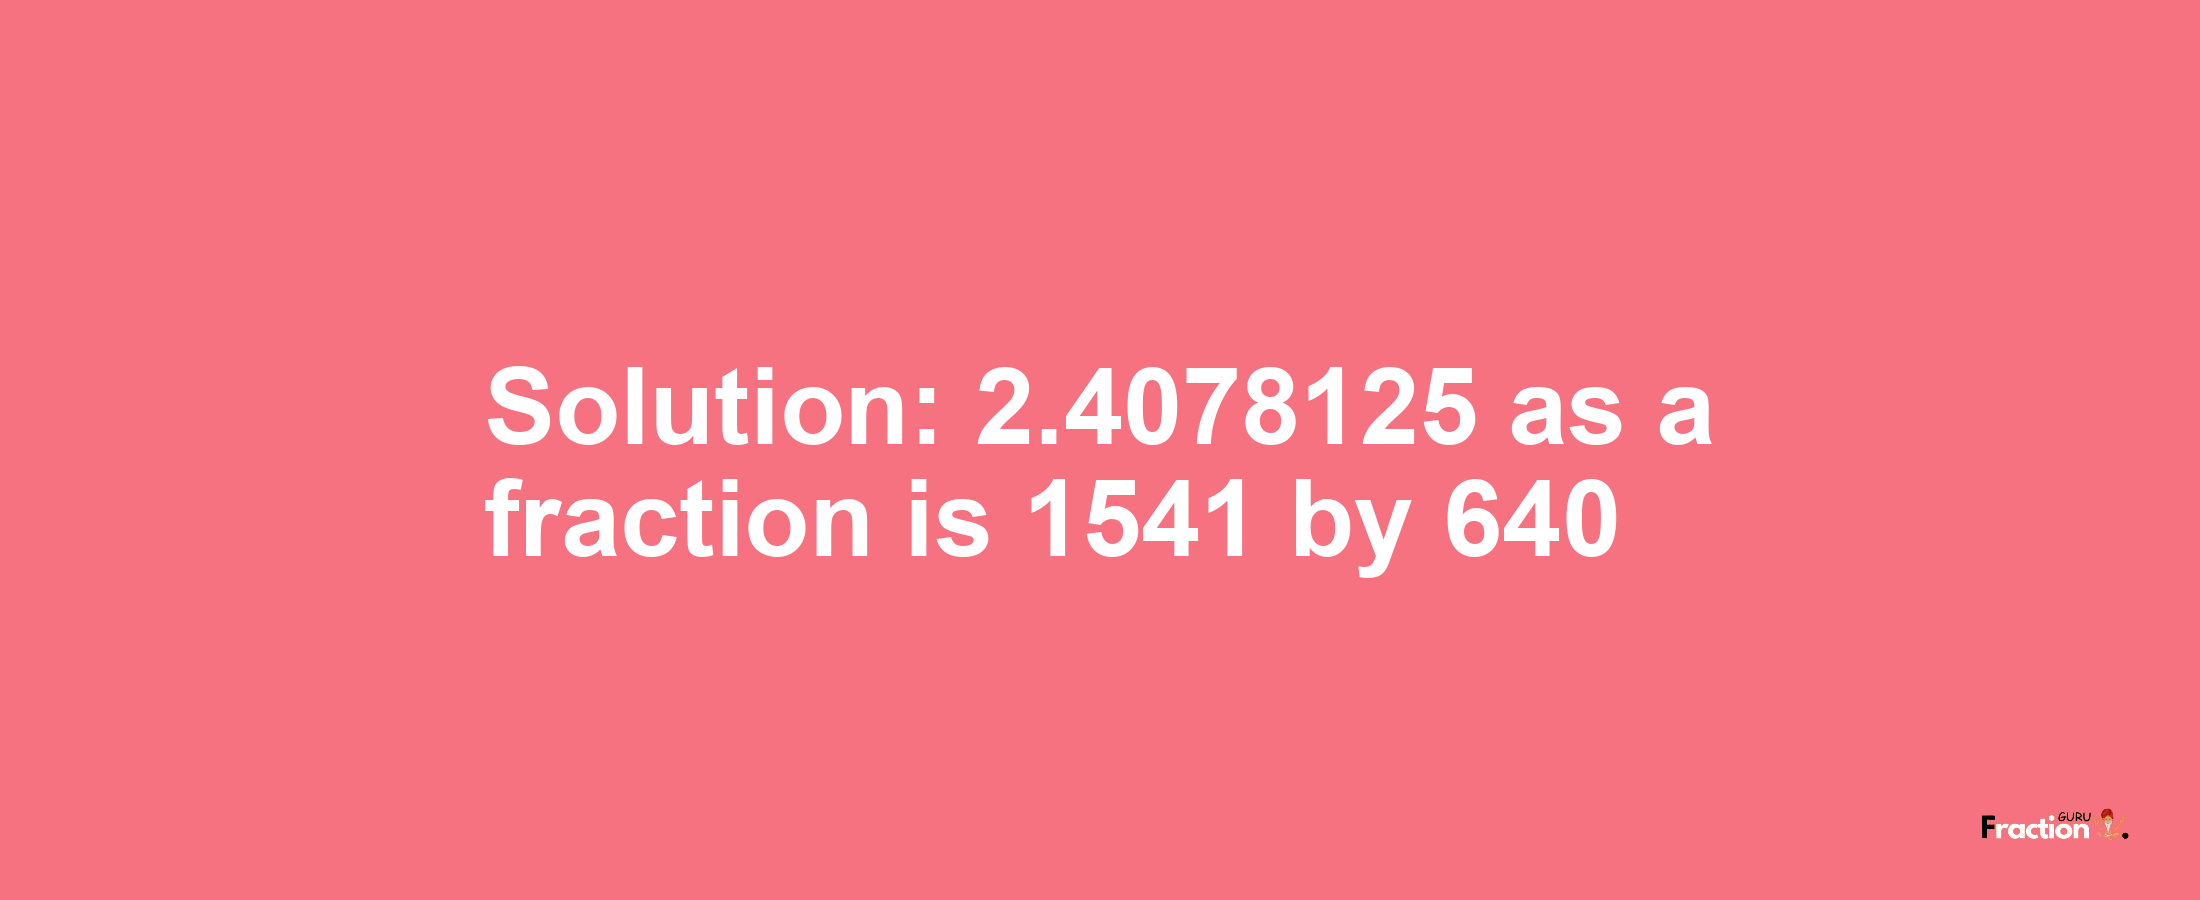 Solution:2.4078125 as a fraction is 1541/640